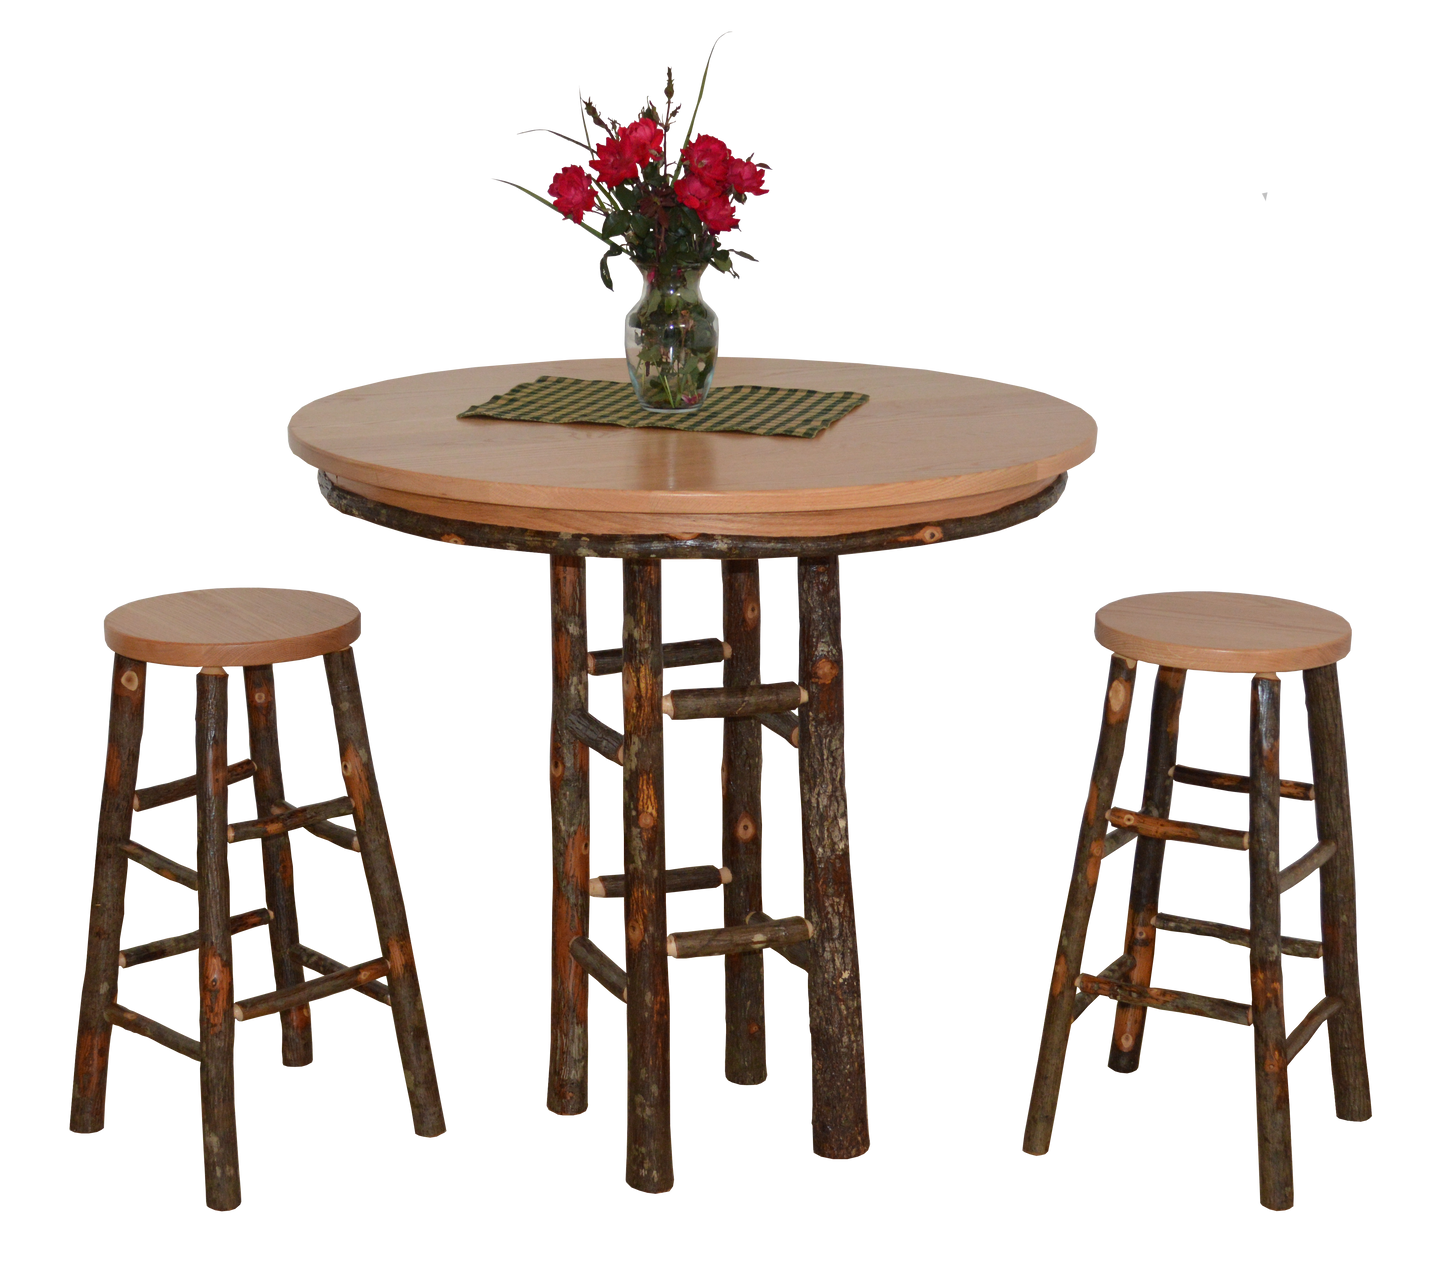 A&L Furniture Co. Hickory Bar Stool - LEAD TIME TO SHIP 10 BUSINESS DAYS